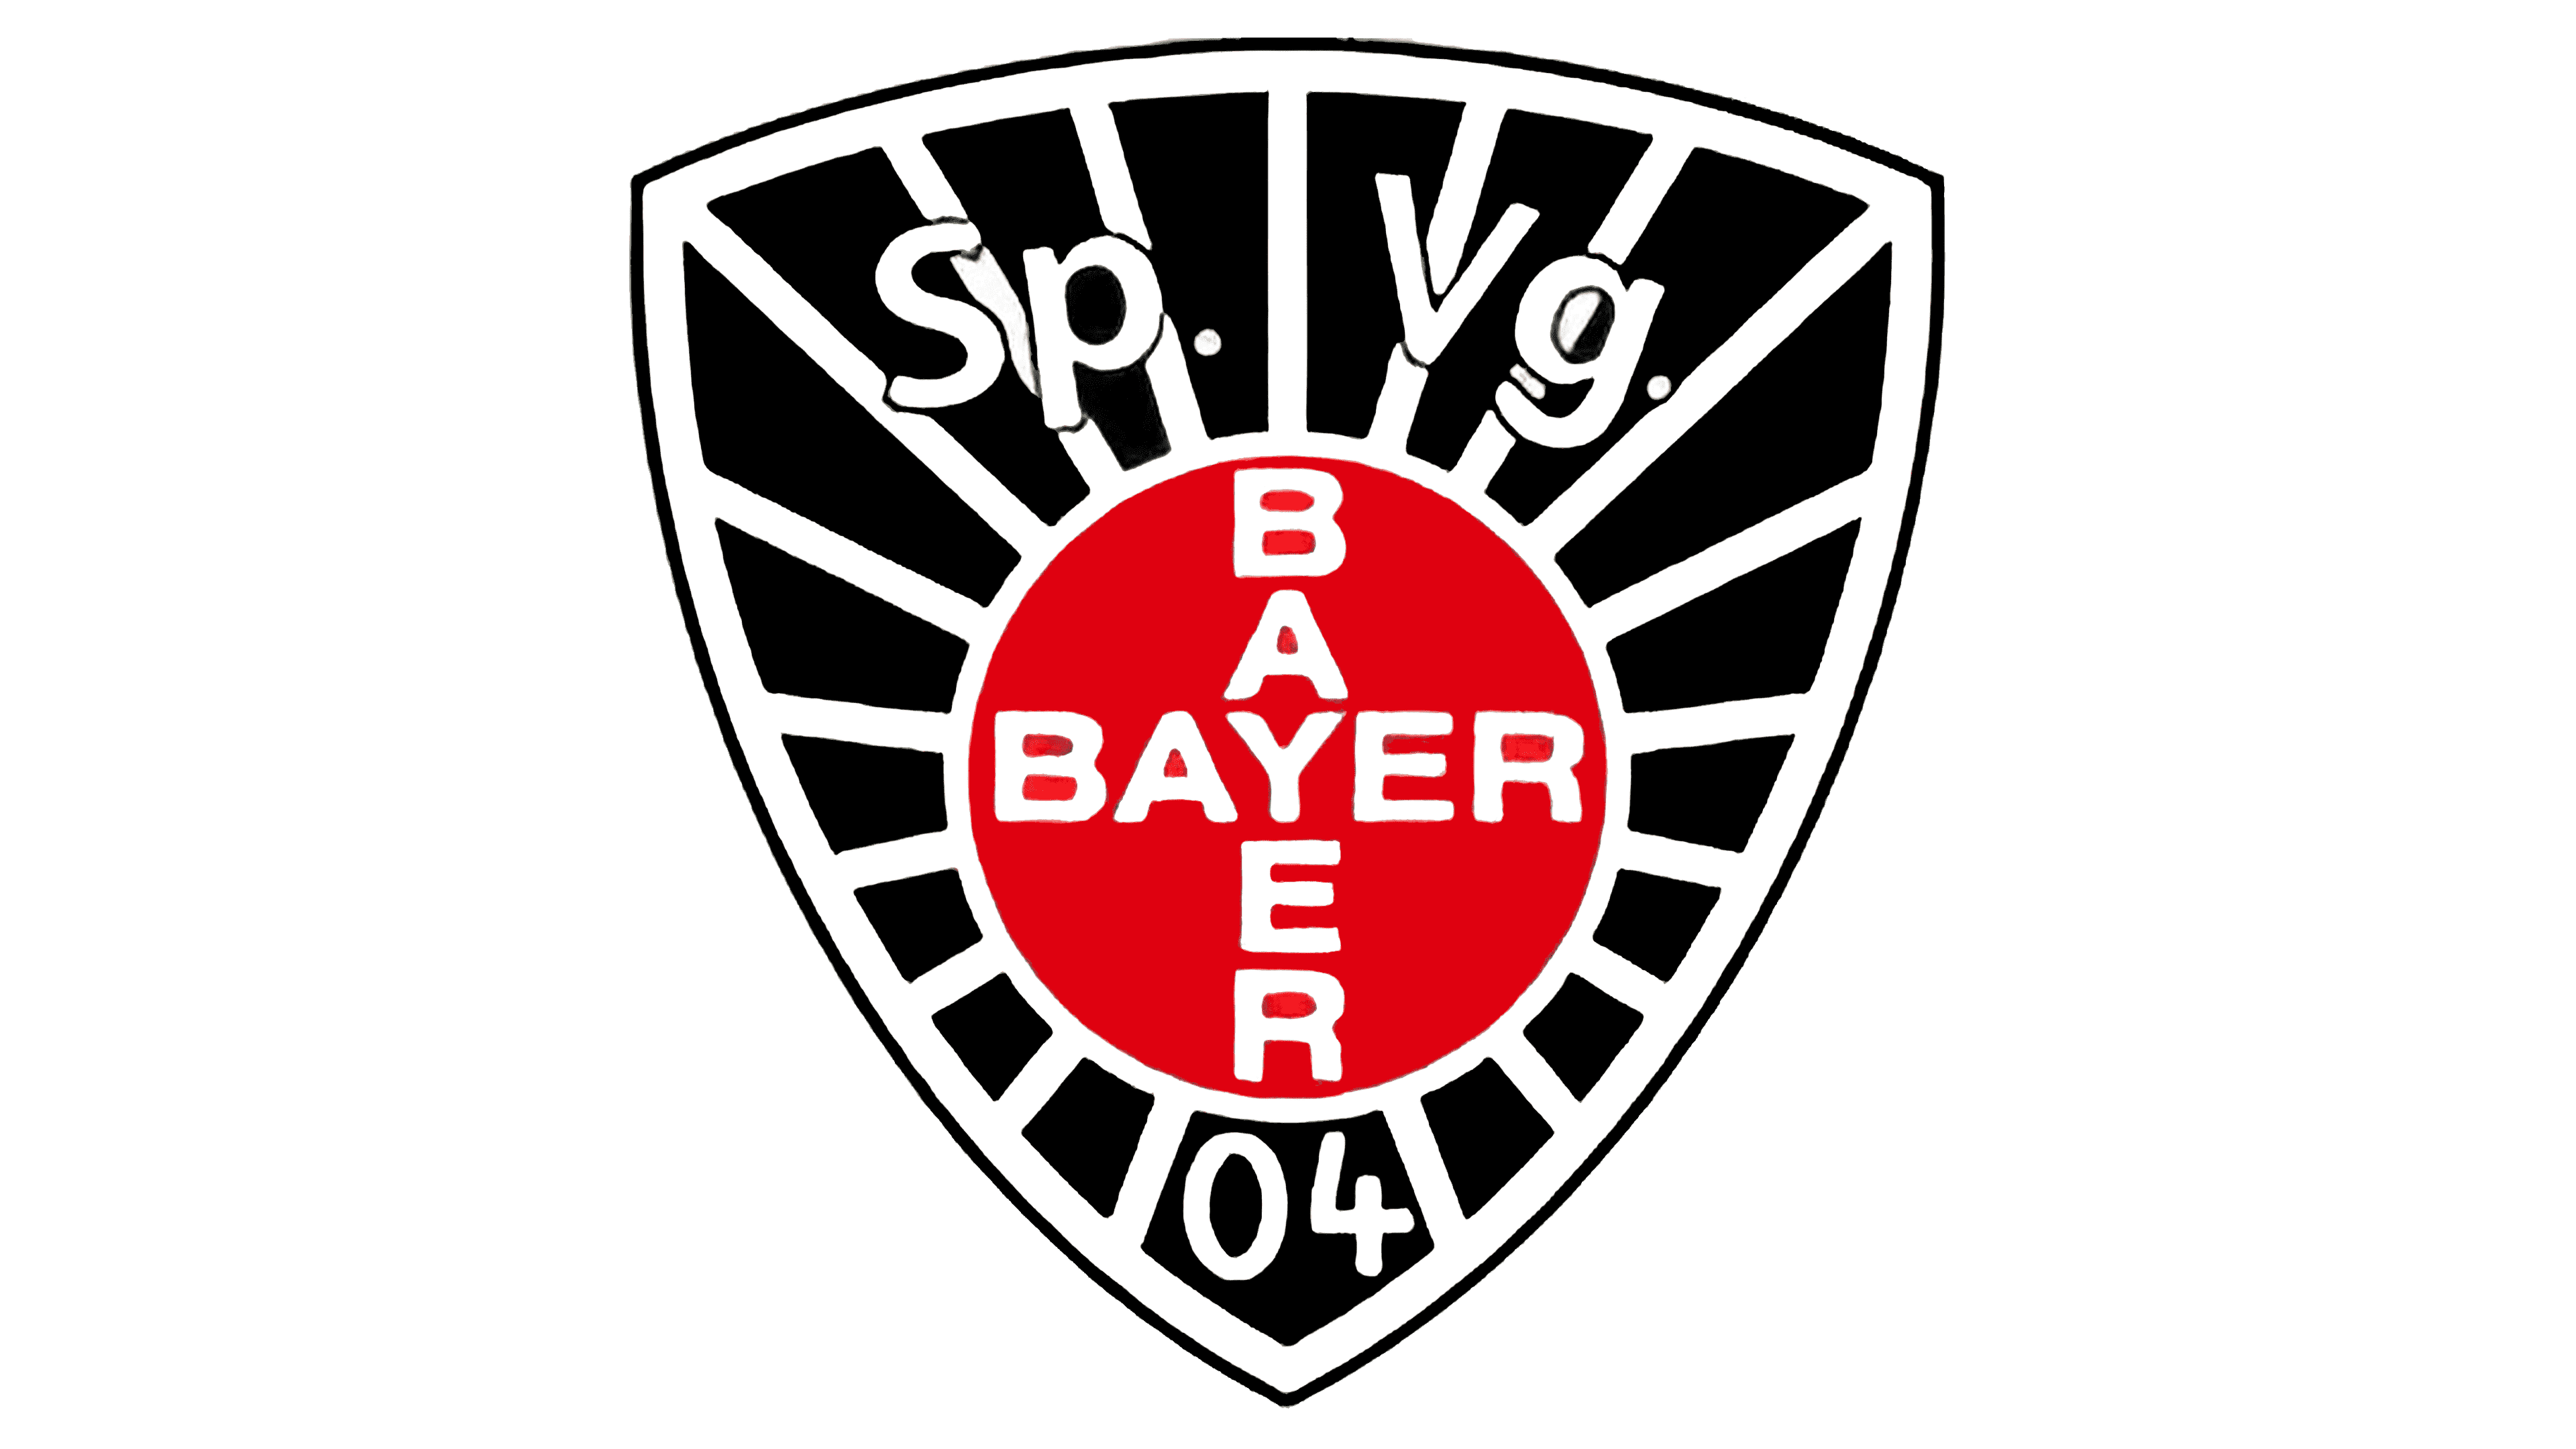 Bayer 04 Leverkusen Logo The Most Famous Brands And Company Logos In The World